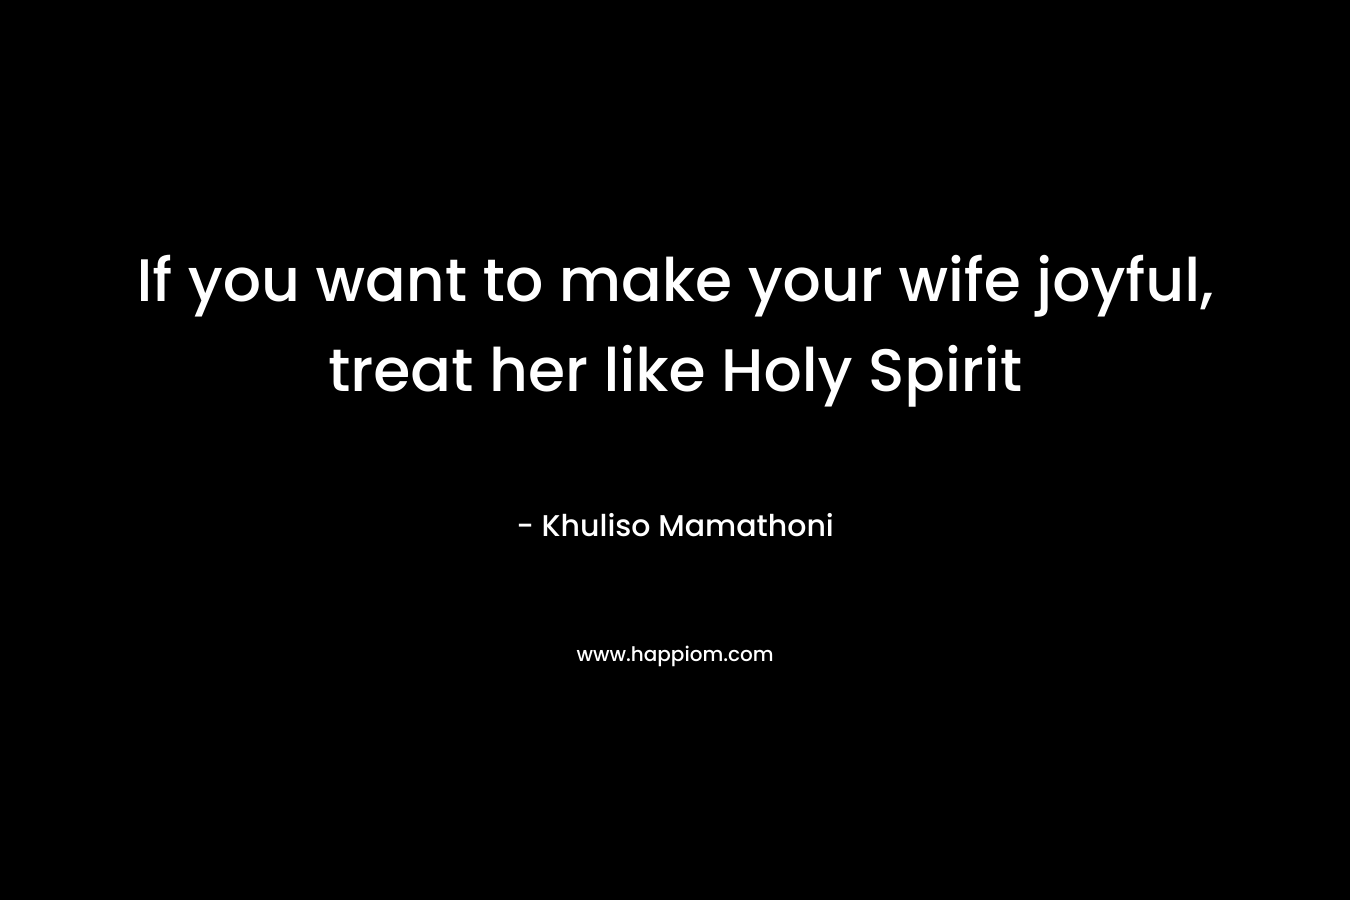 If you want to make your wife joyful, treat her like Holy Spirit